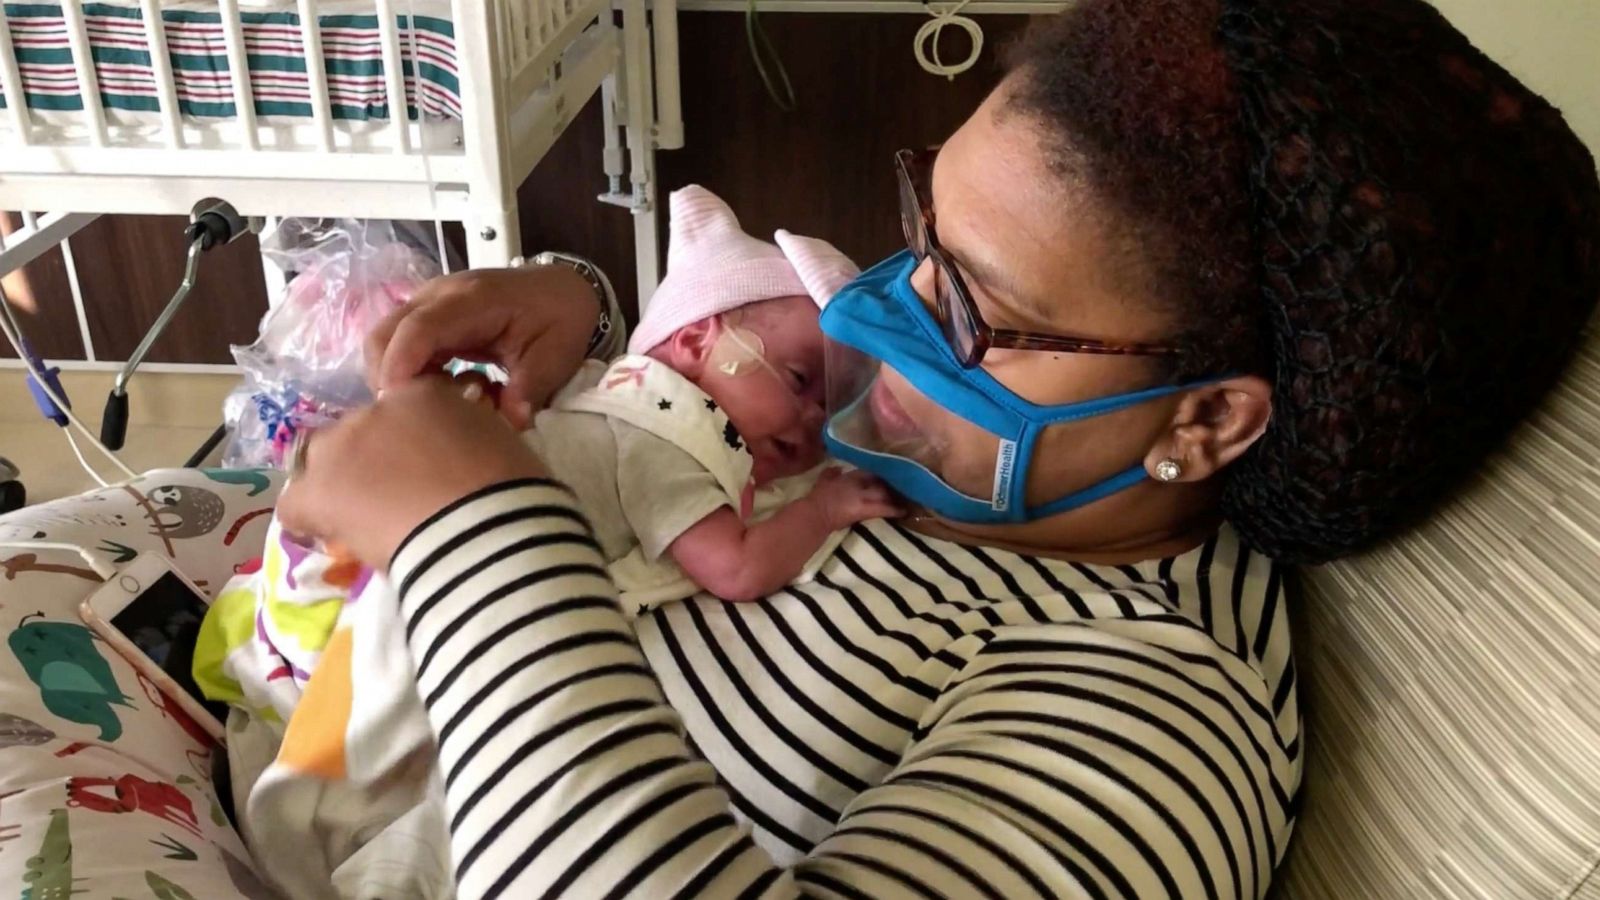 PHOTO: Aria Mason spends time with her newborn, Amara Mason-Folse, at Ochsner Baptist's neonatal intensive care unit in New Orleans.